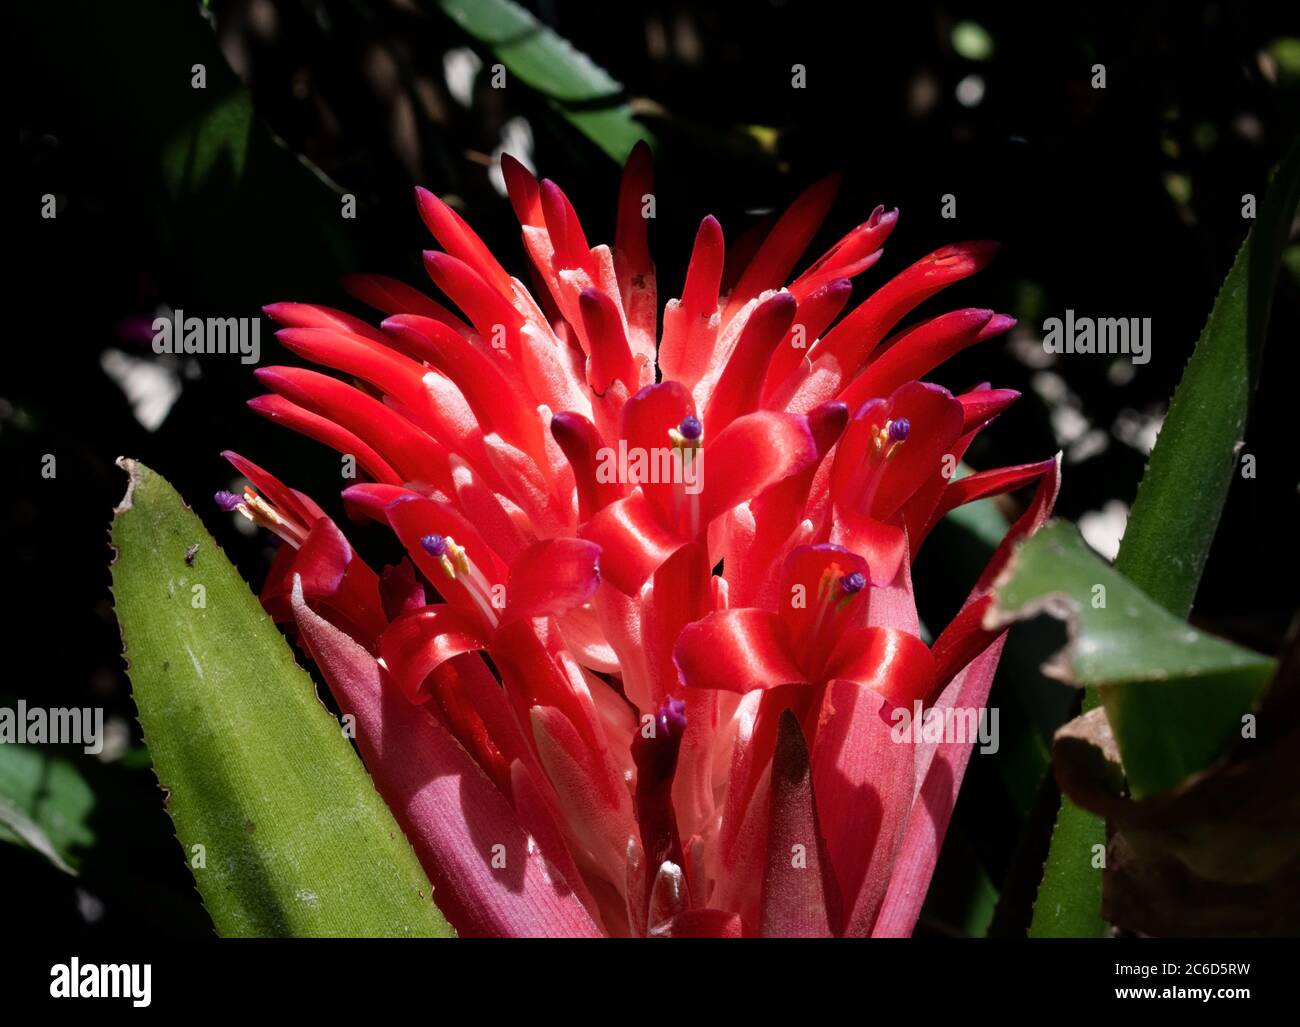 Red billbergia pyramidalis or flaming torch flower with purple tips. Plant is against a dark nature background with shadows and green leaves. Stock Photo